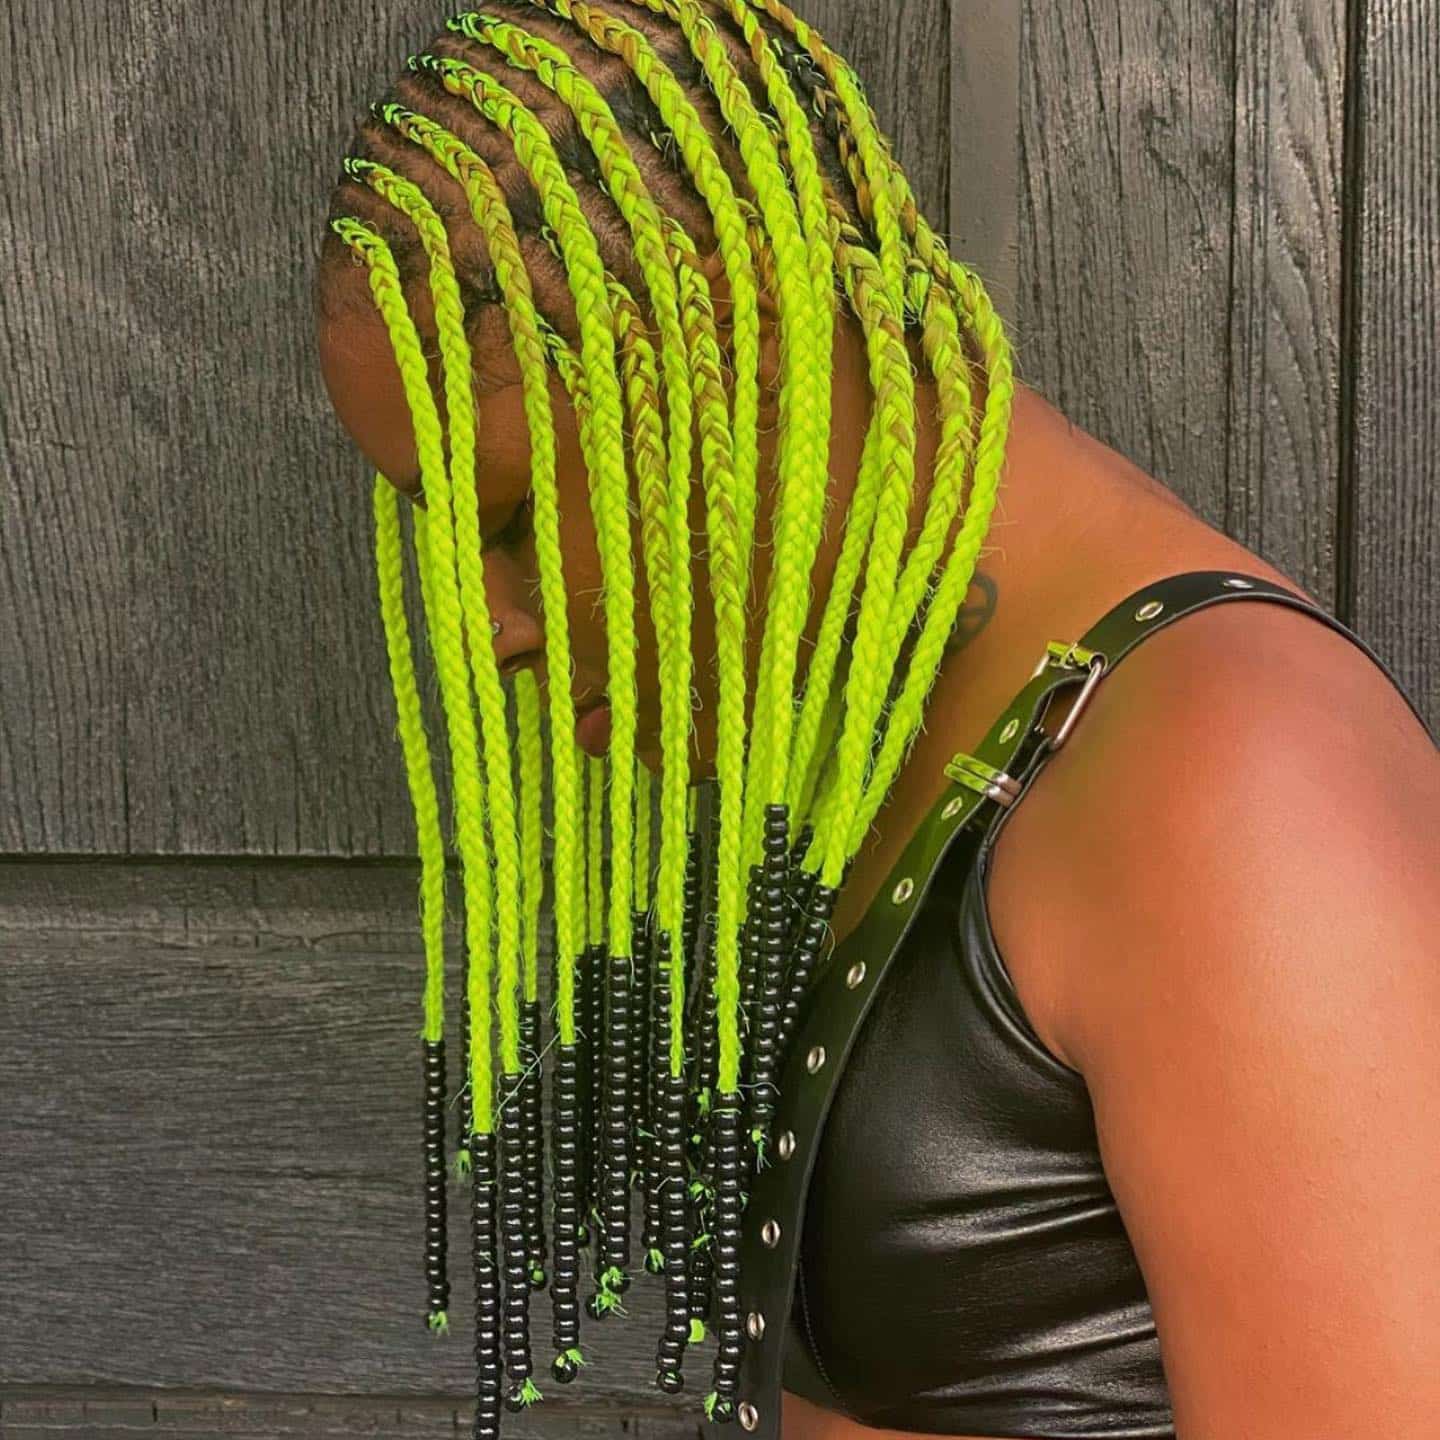 Image of Green Braids With Beads in the style of green braids